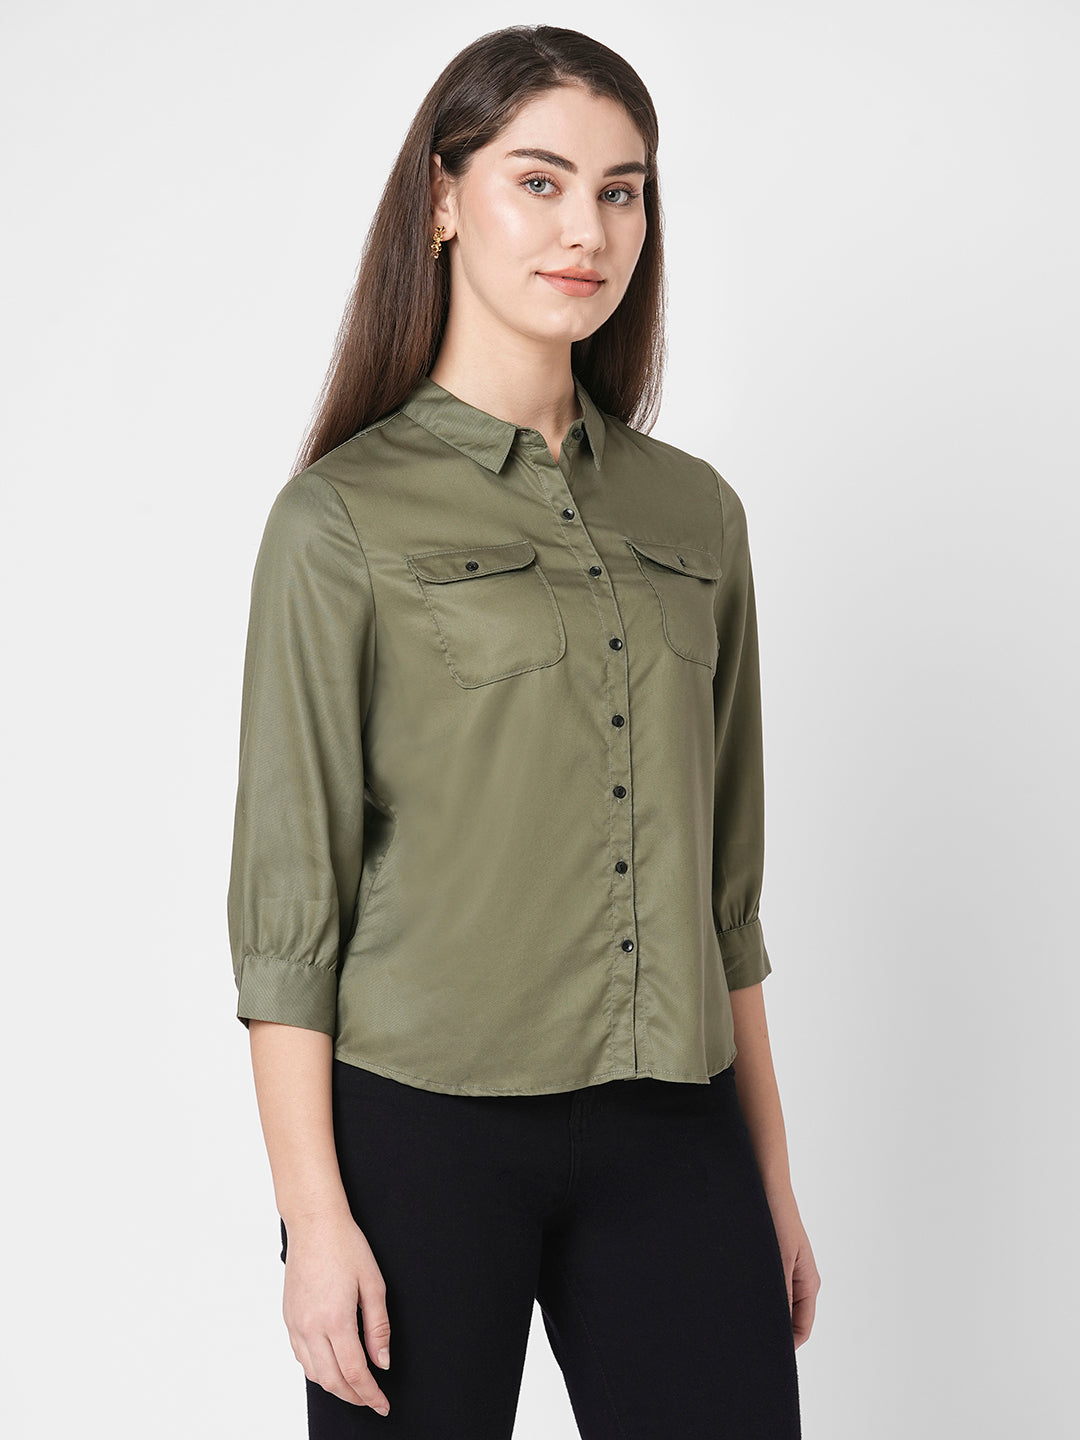 Women Solid Slim Fit Casual Shirt